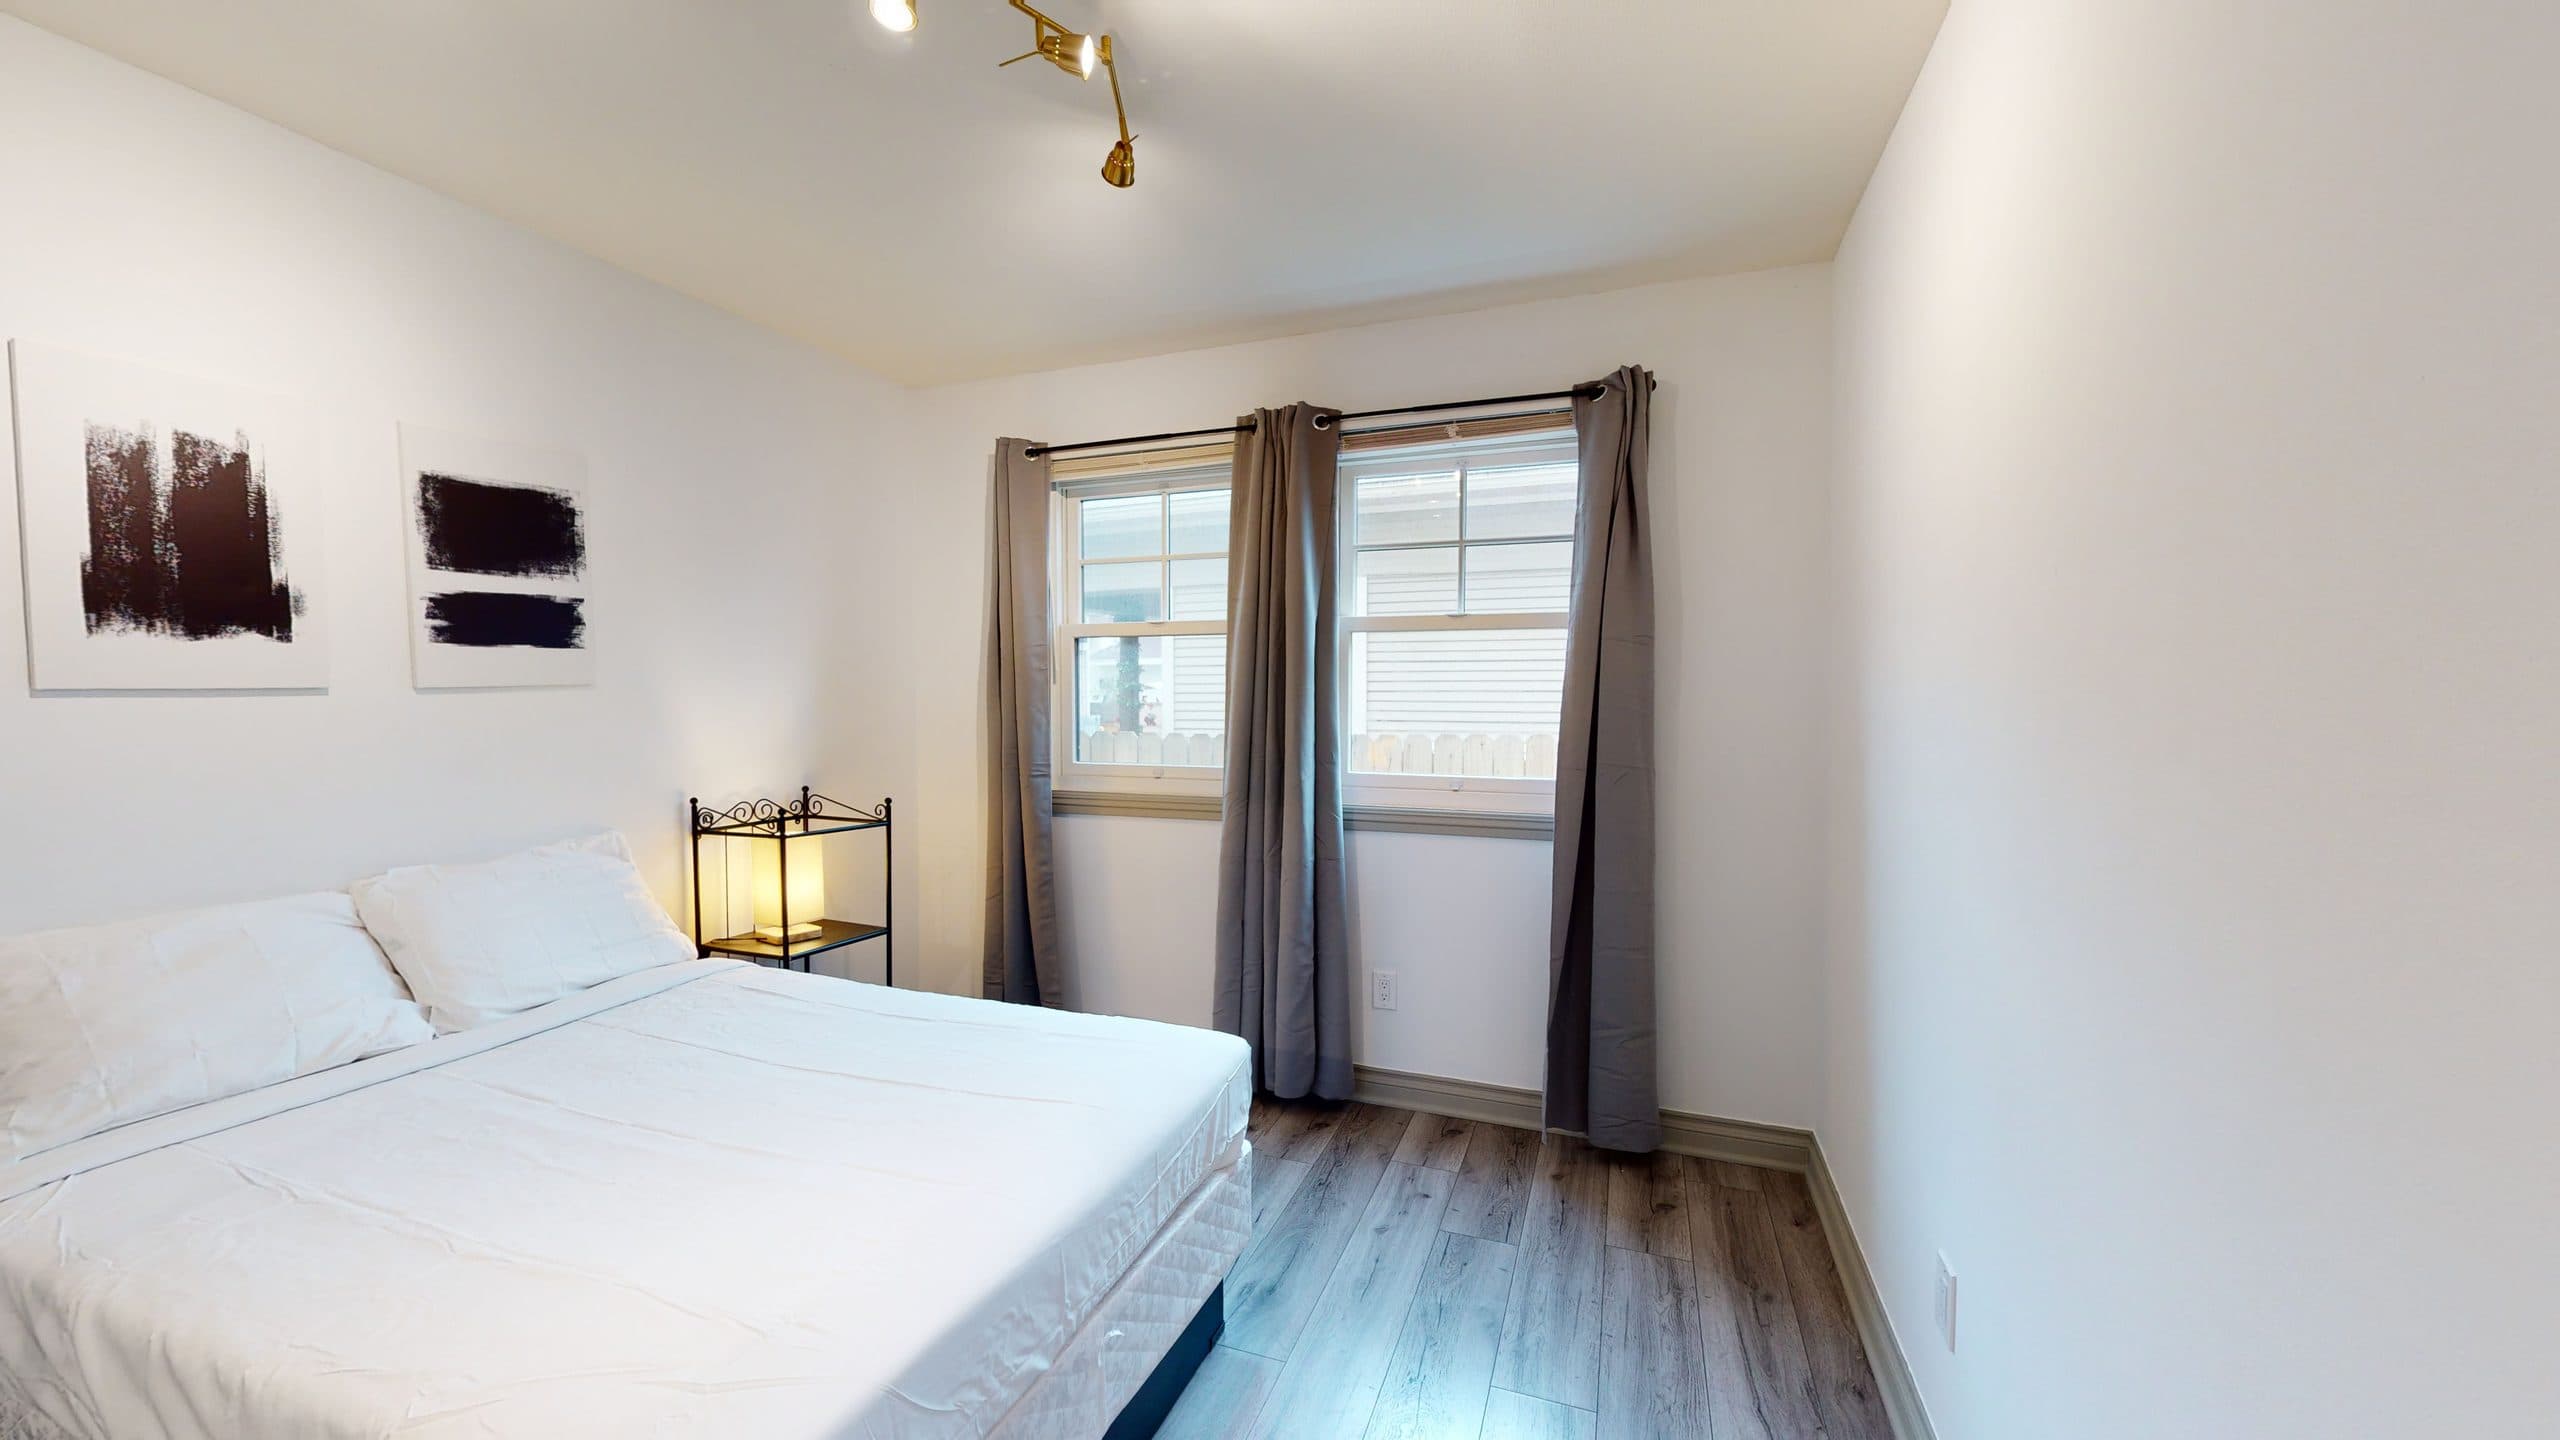 Photo 2 of #2280: Queen Bedroom A at June Homes